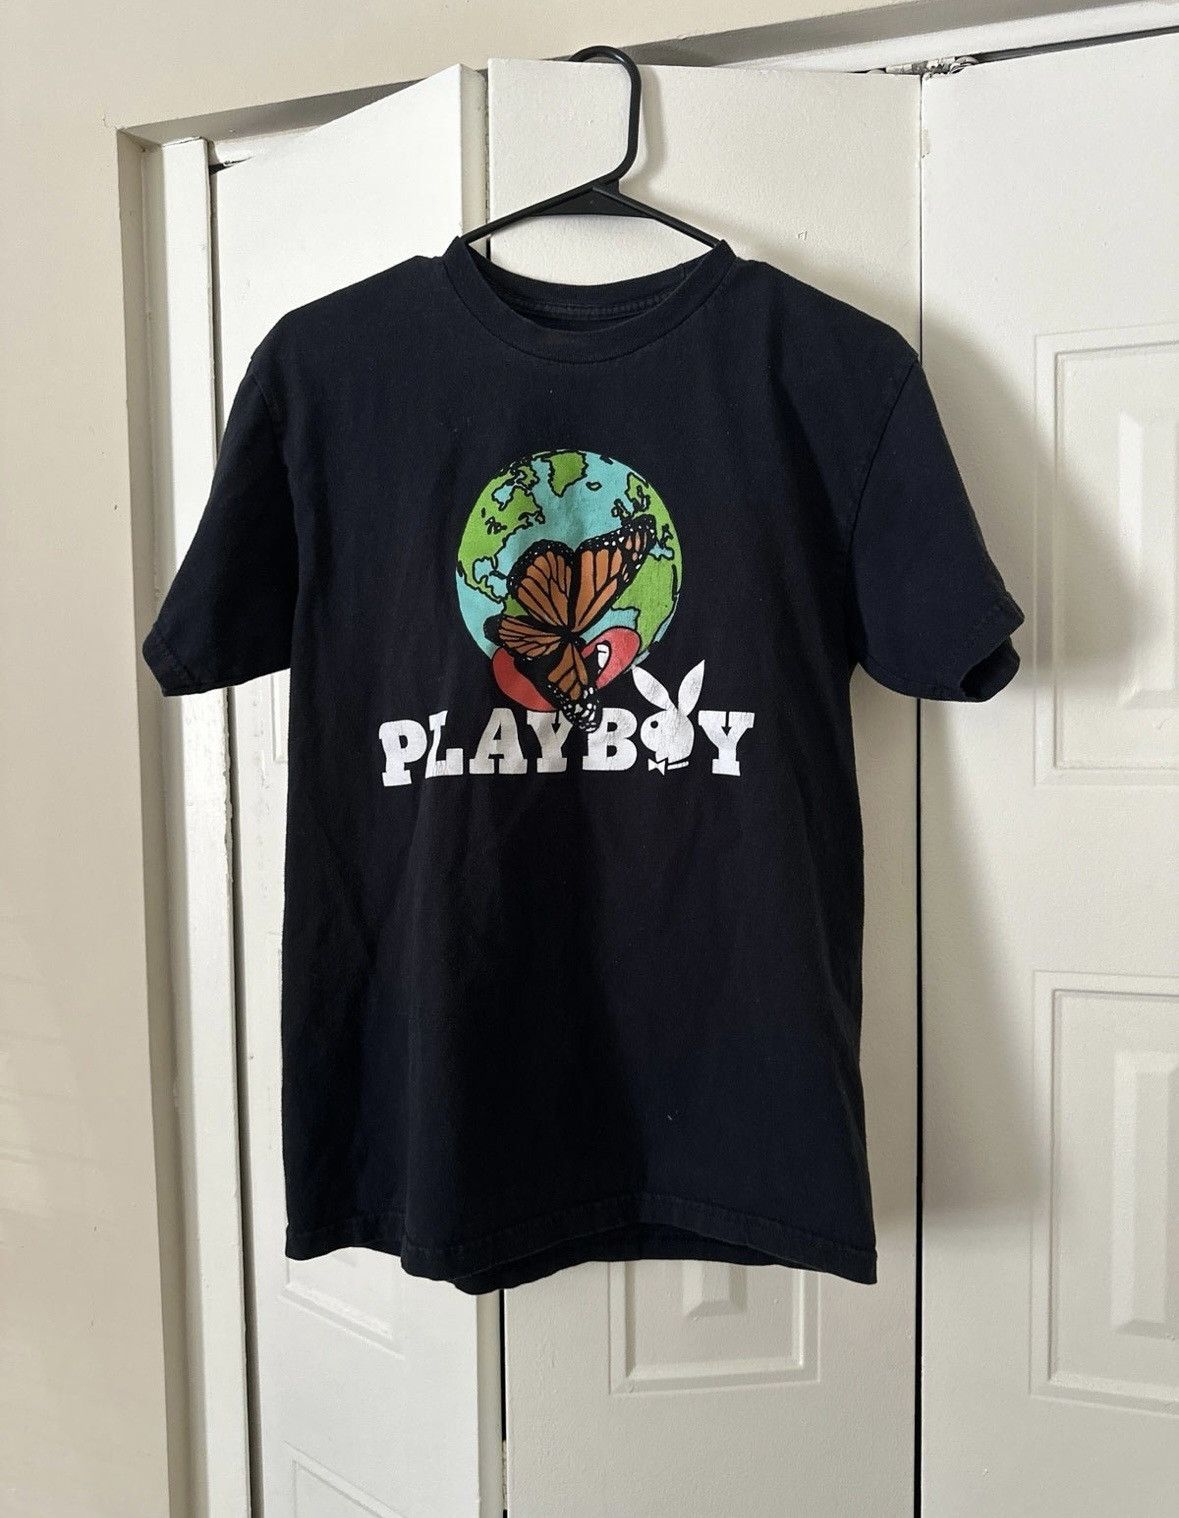 Playboy Playboy Butterfly Shirt Size US M / EU 48-50 / 2 - 1 Preview